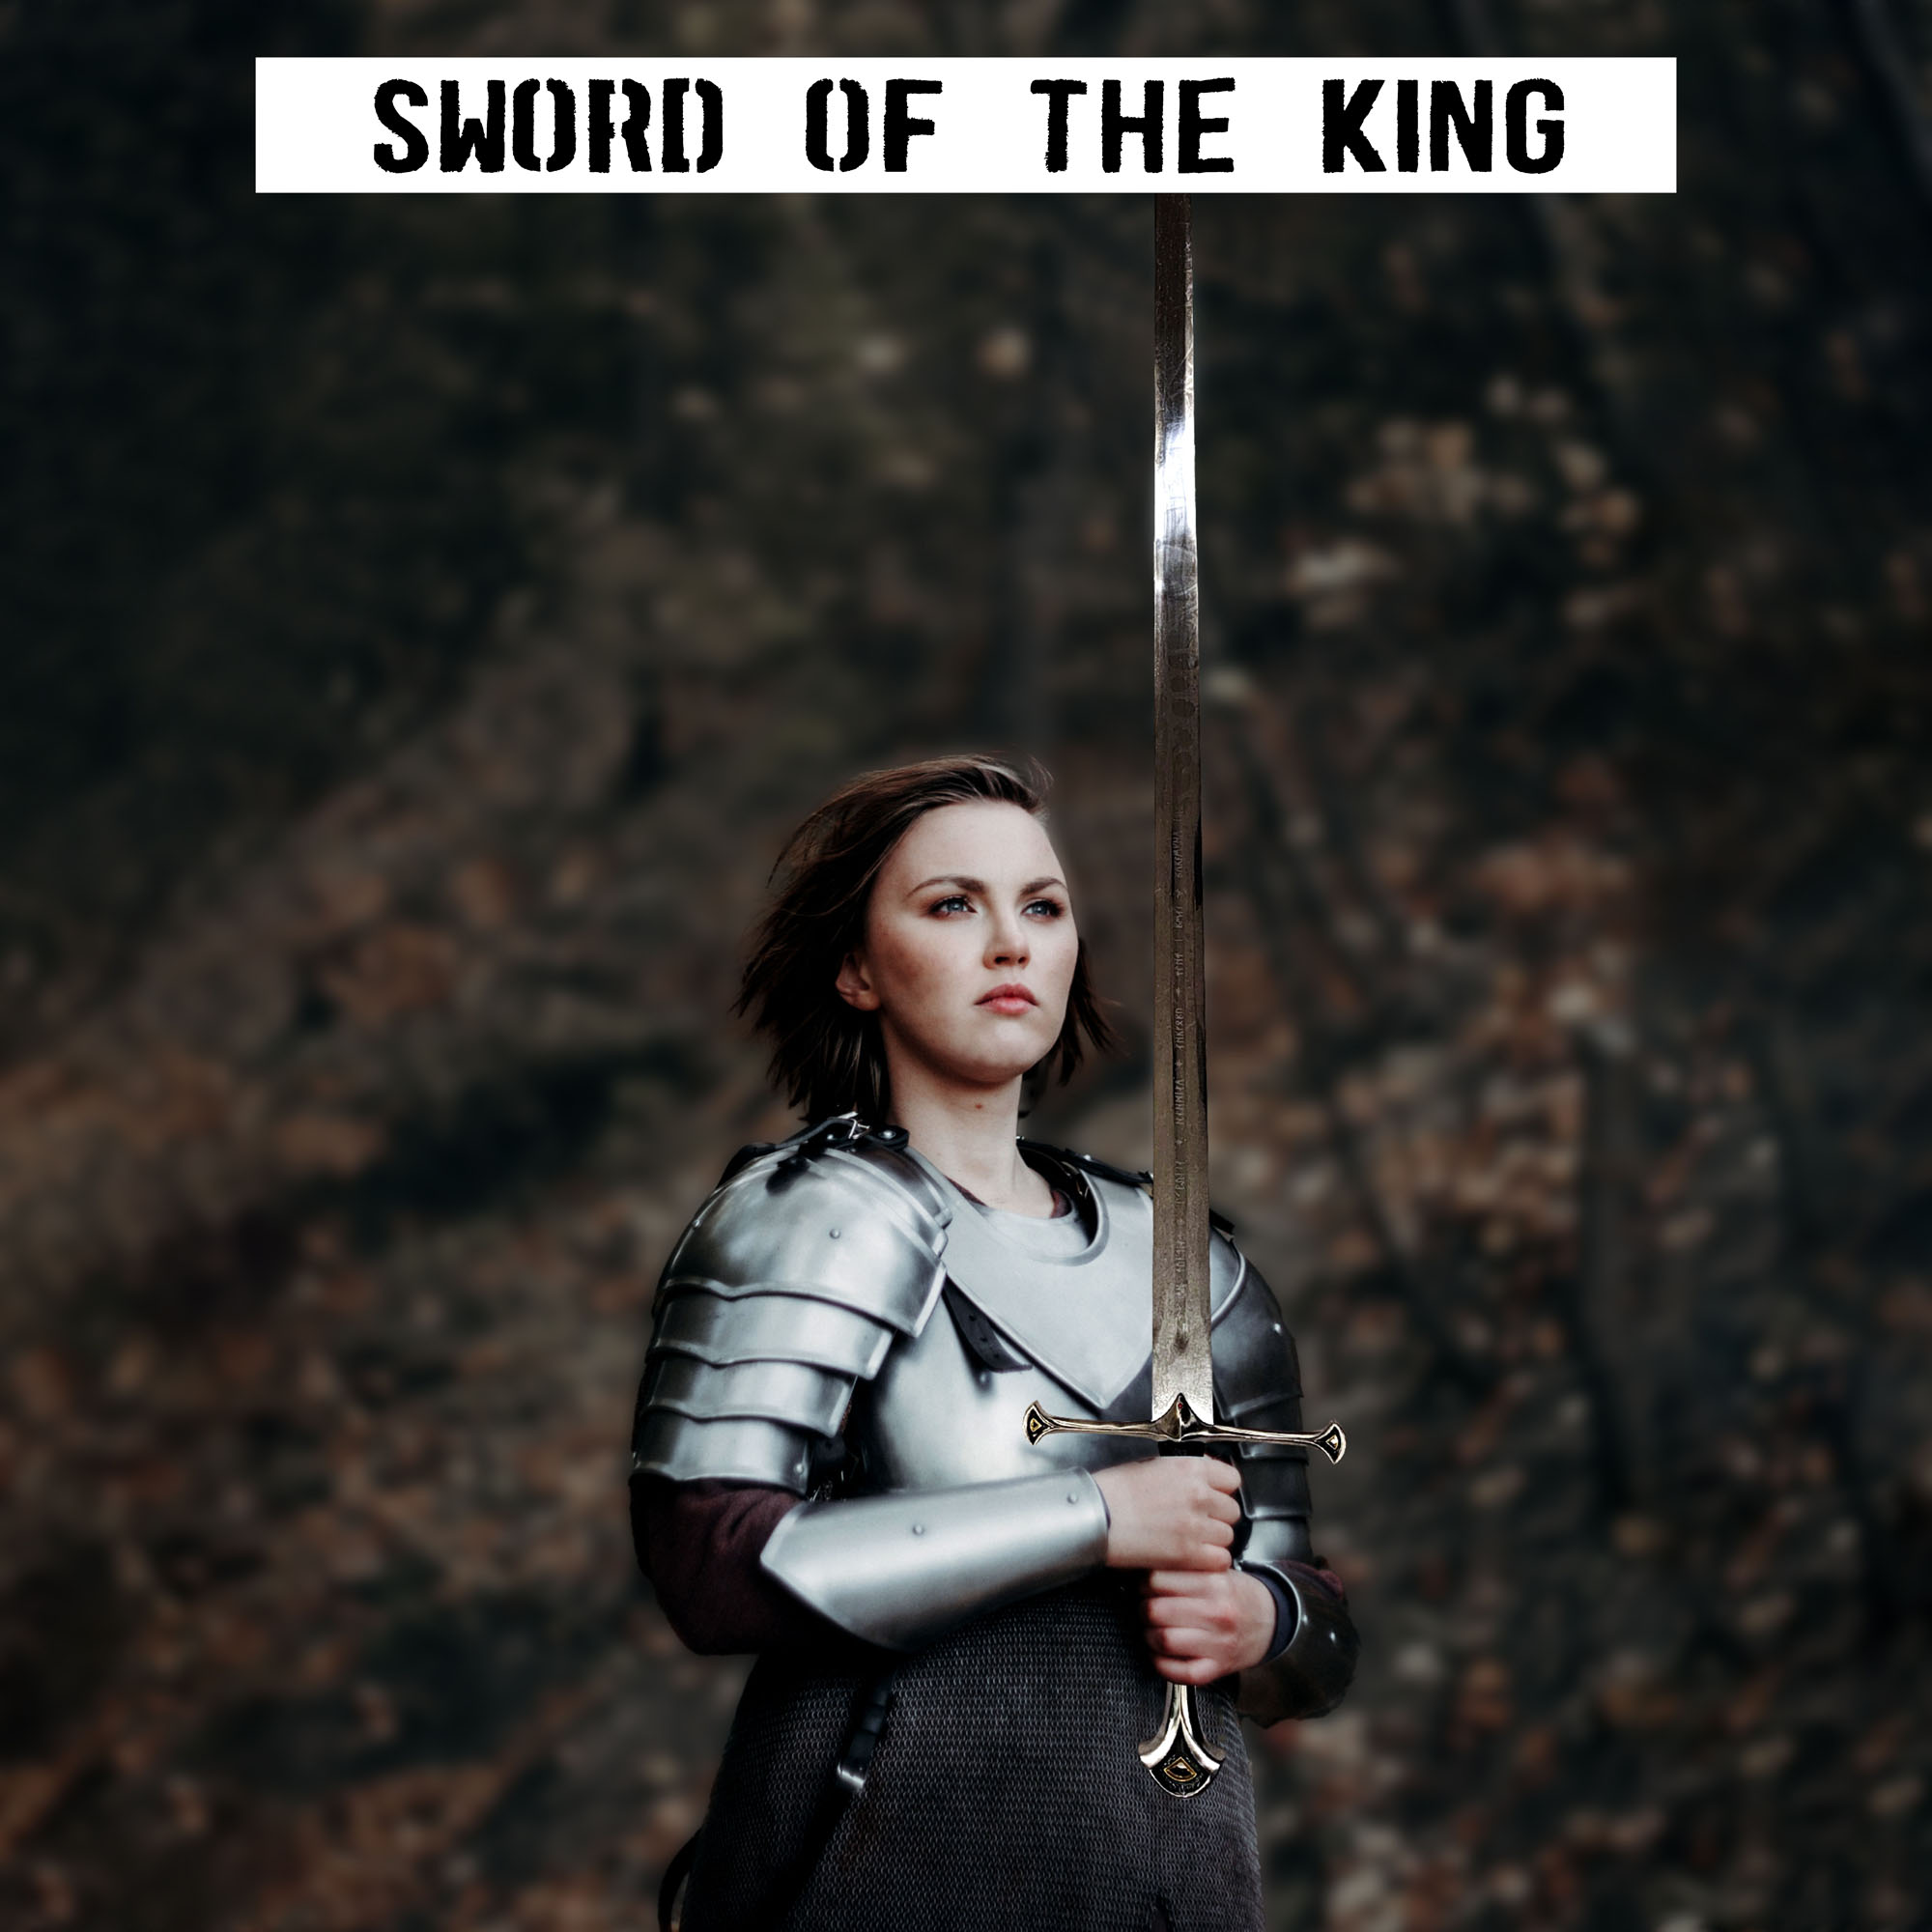 Sword of the king